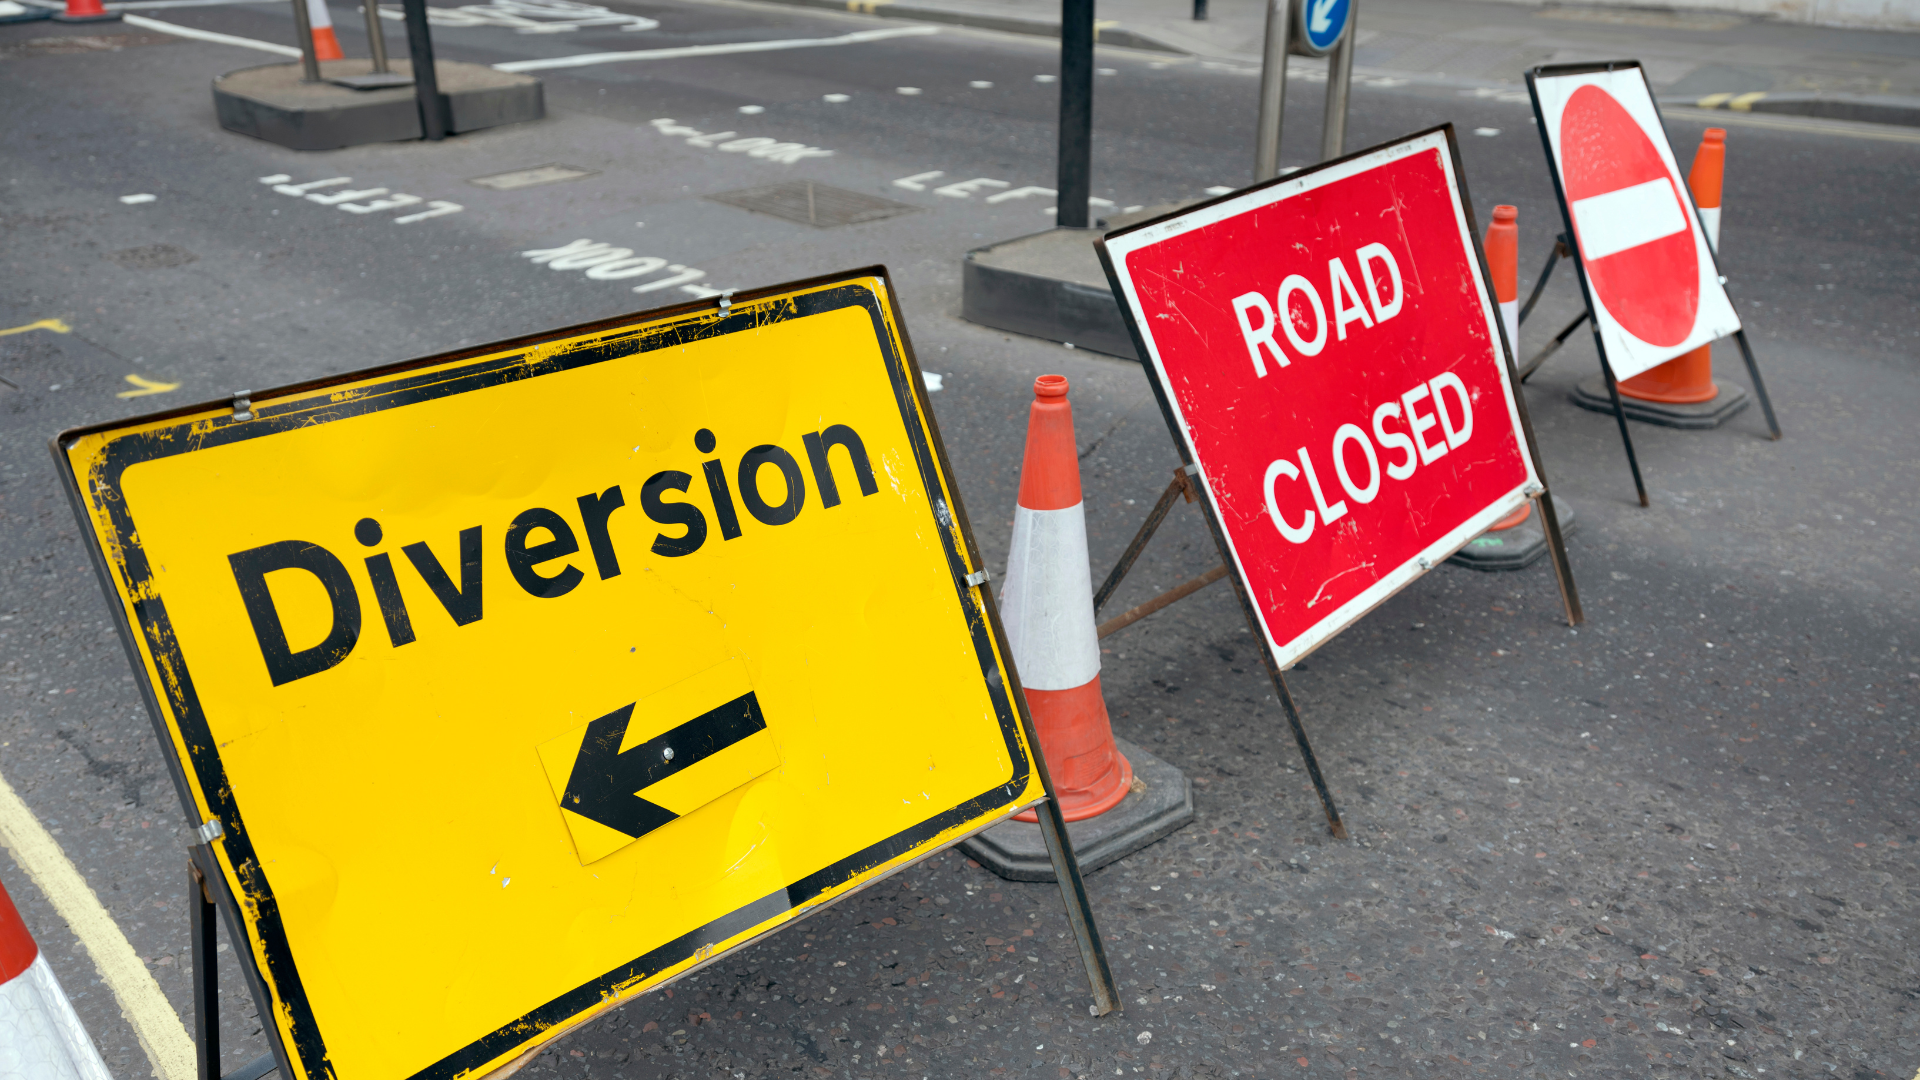 Image of road closure and diversion signs